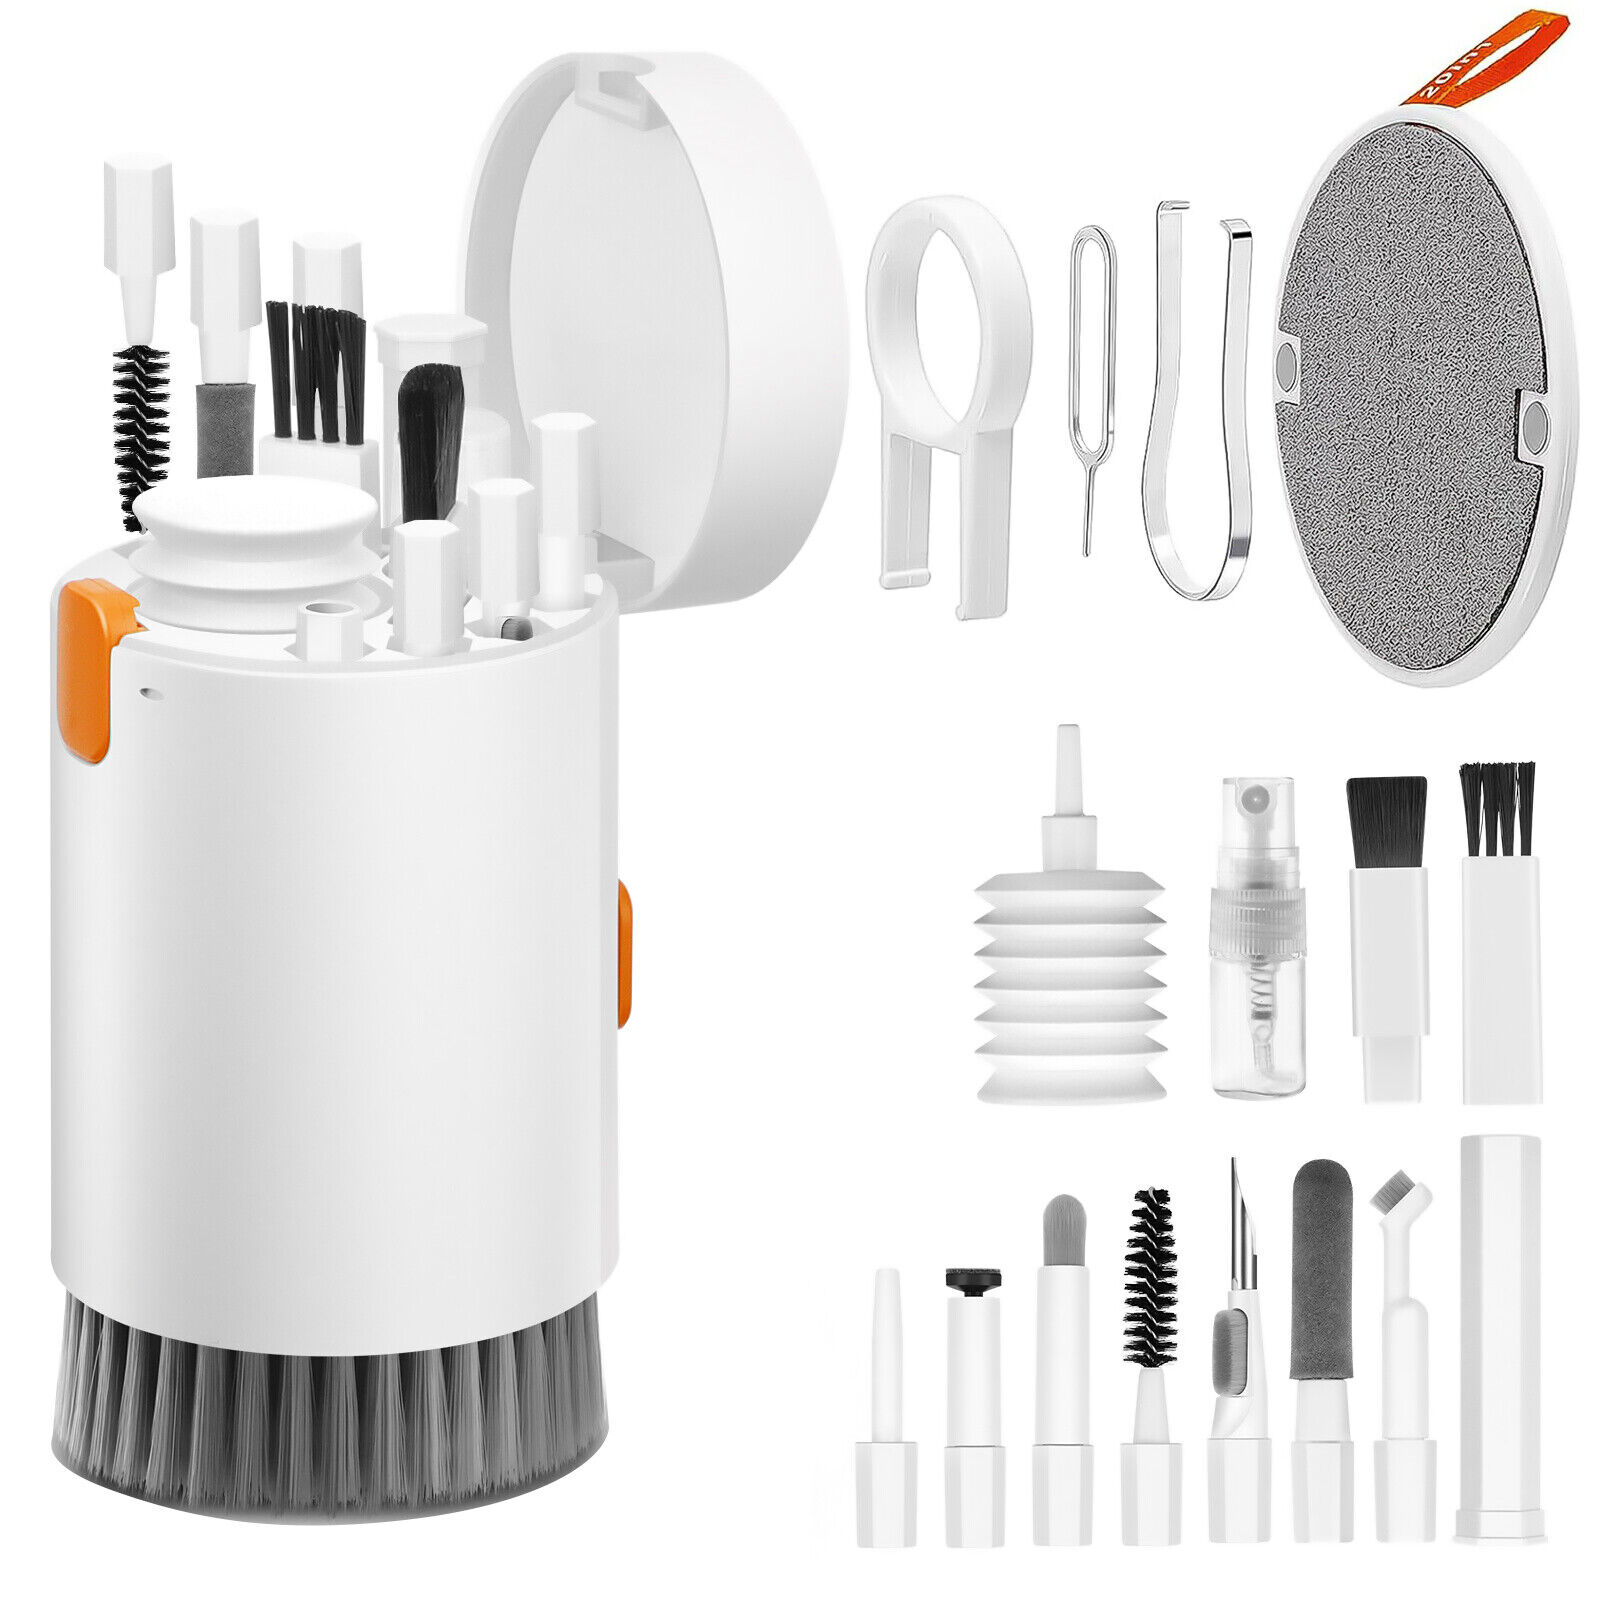 Multi-Function Cleaning Kit for Laptop Keyboard Airpod Earbuds Screens & More